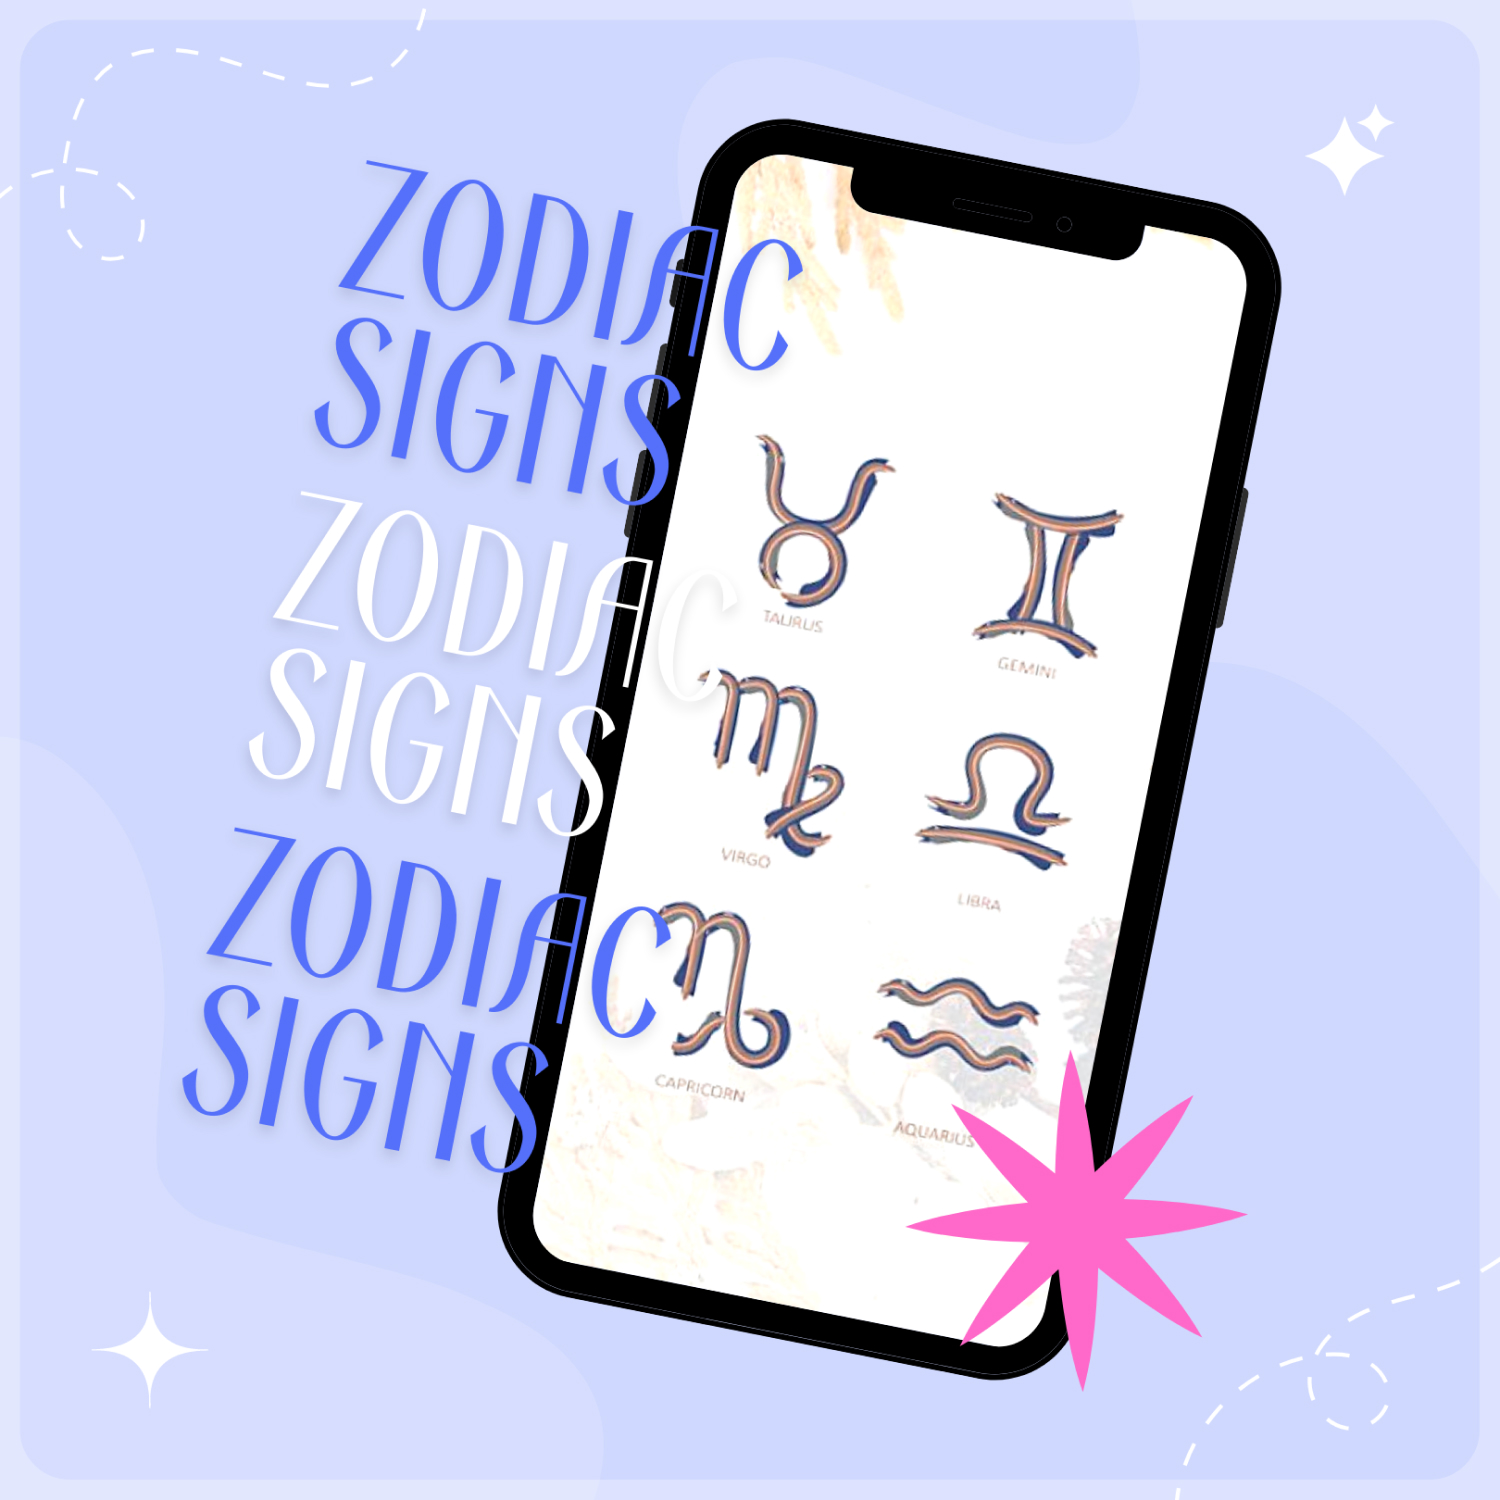 Preview of the zodiacs on the smartphone screen.